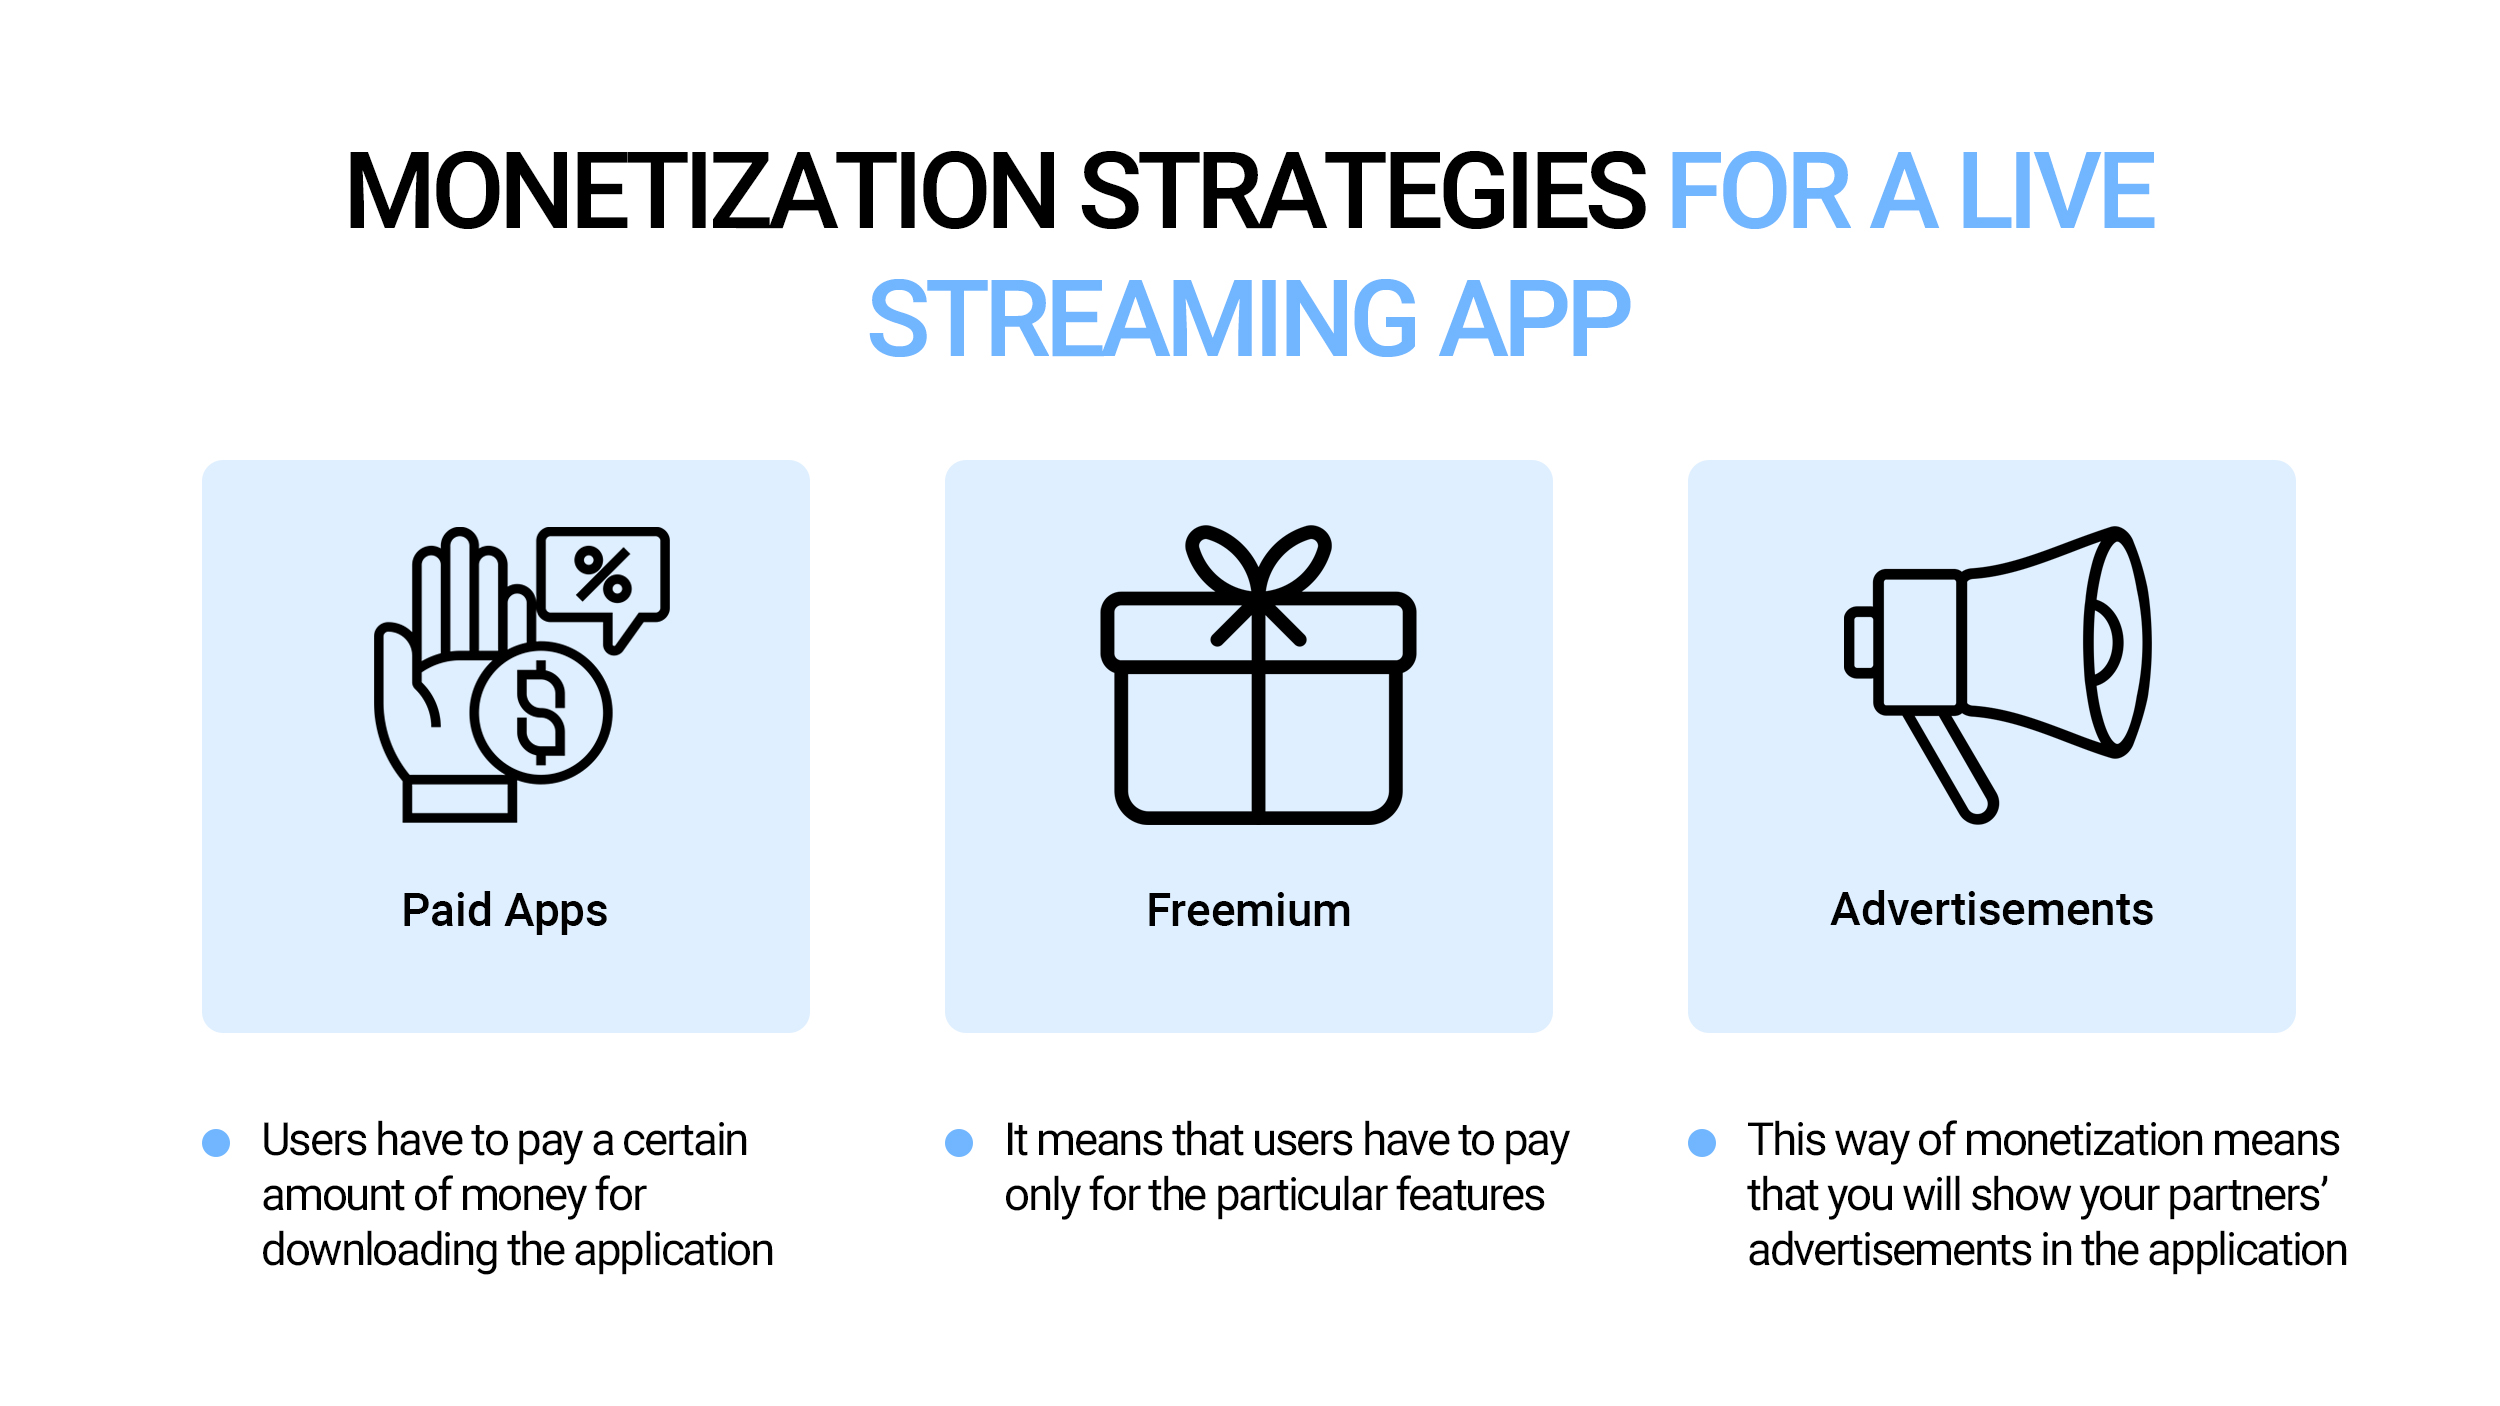 Monetization strategies for a live streaming app